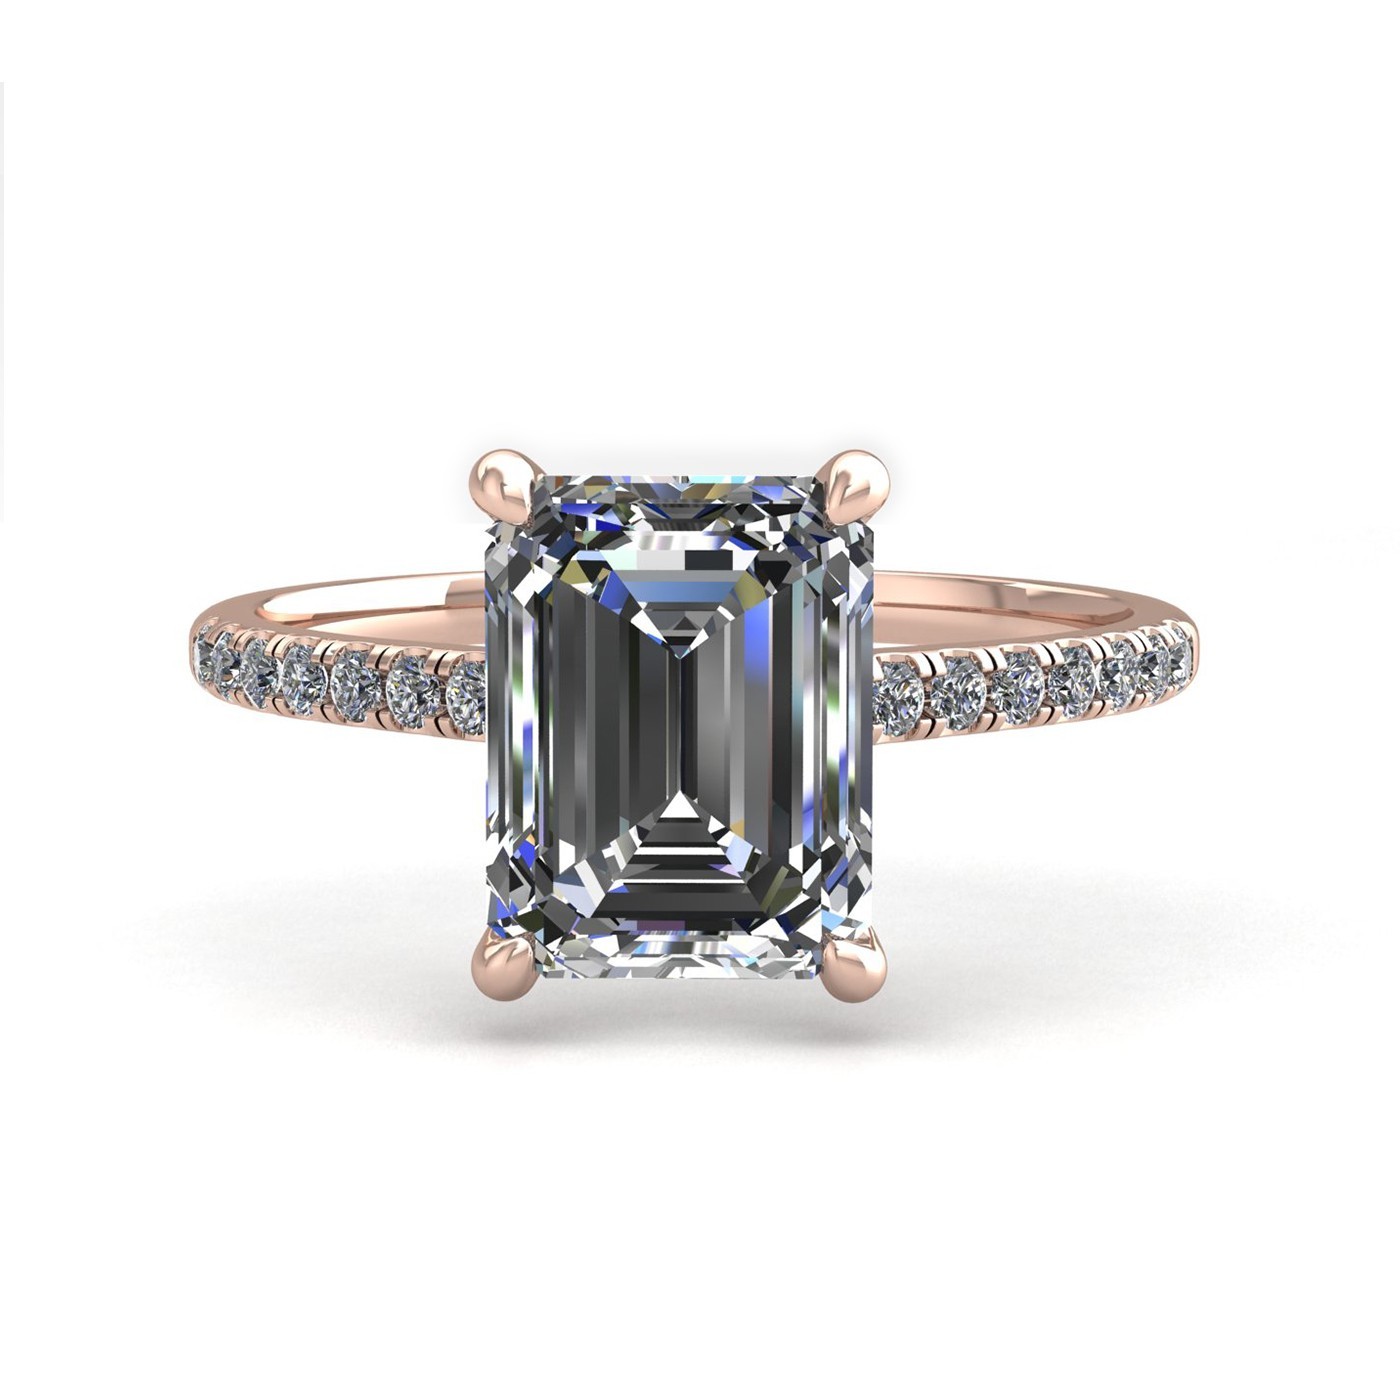 18k rose gold 1.0ct 4 prongs emerald cut diamond engagement ring with whisper thin pavÉ set band Photos & images